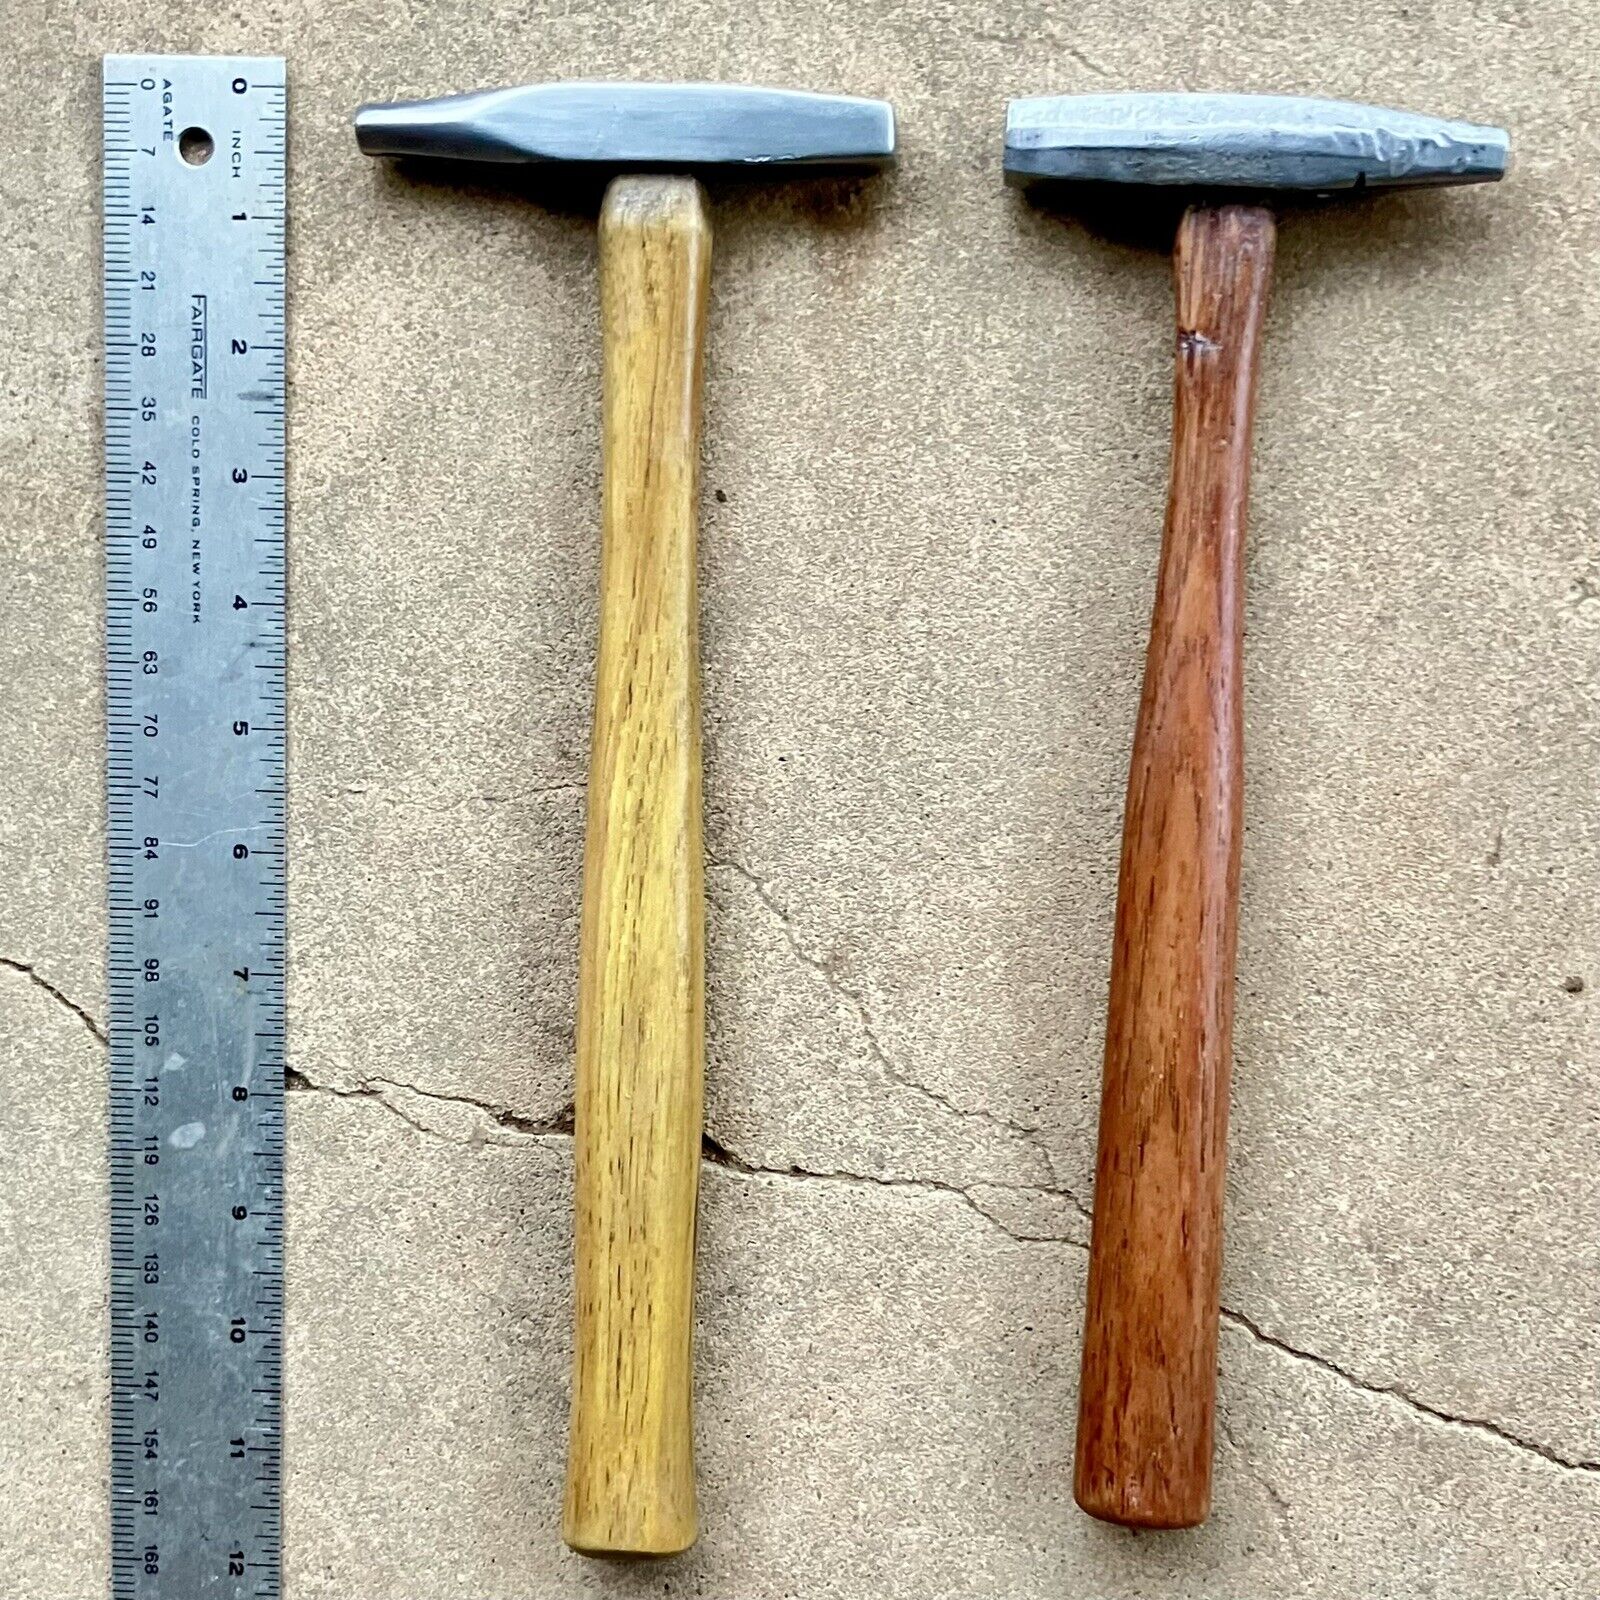 ⚒️ 2 Vintage Unmarked Tack Hammers, Cleaned, Solid Handles & 